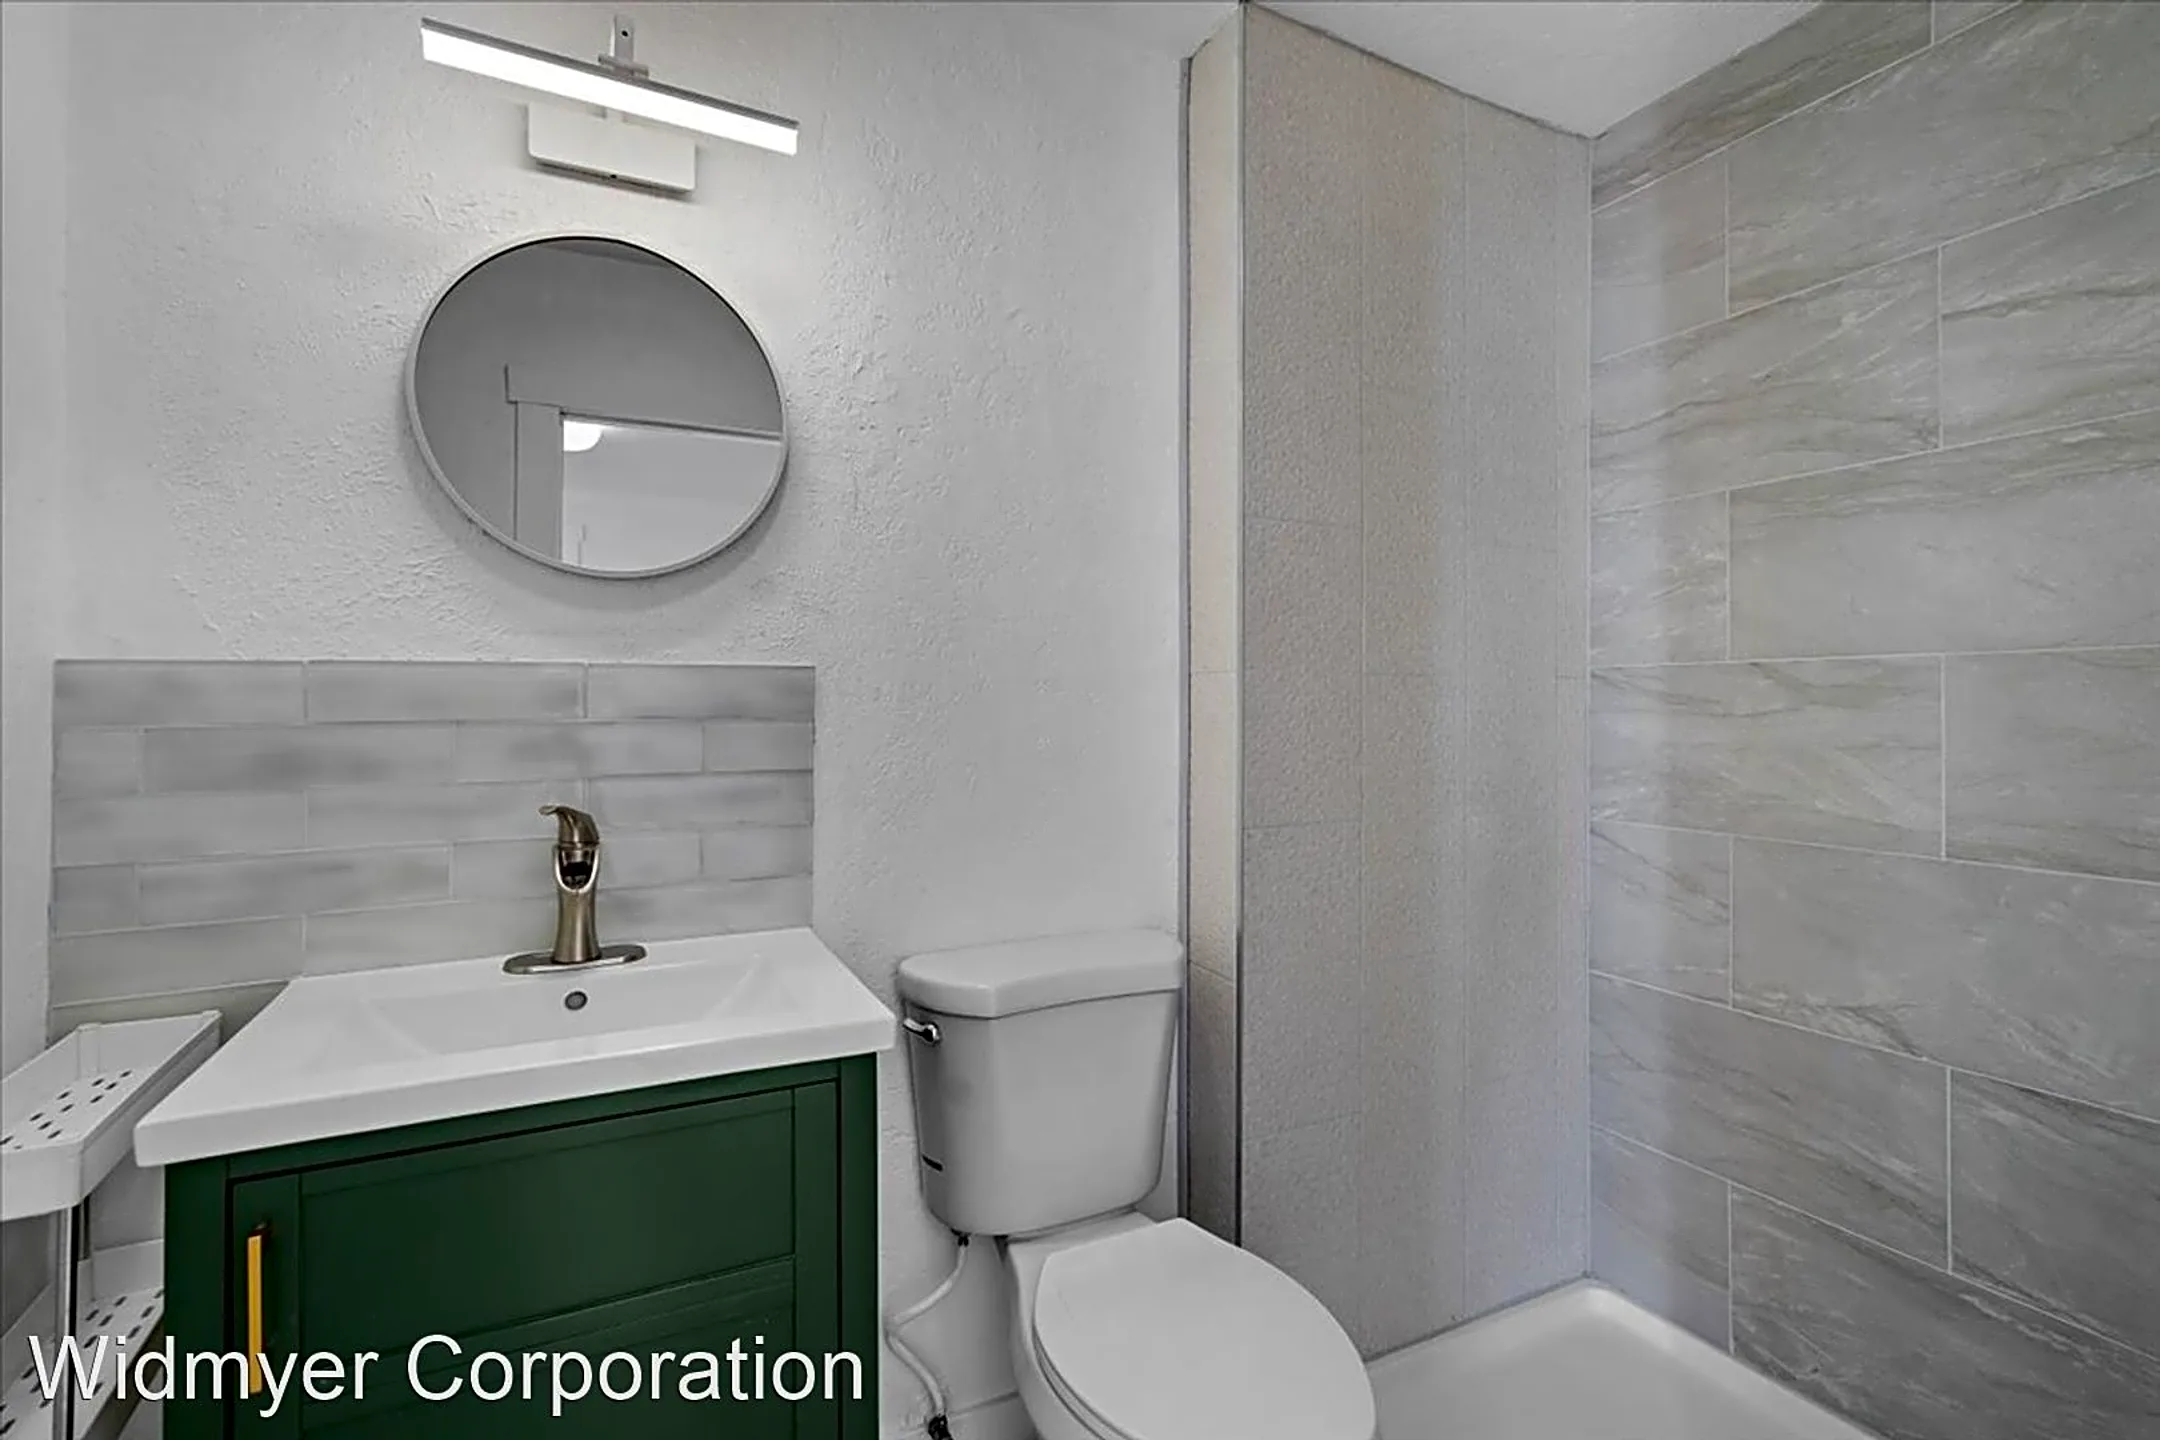 Bathroom - Now leasing BEAUTIFUL and unique DOWNTOWN studios! - Coeur D Alene, ID